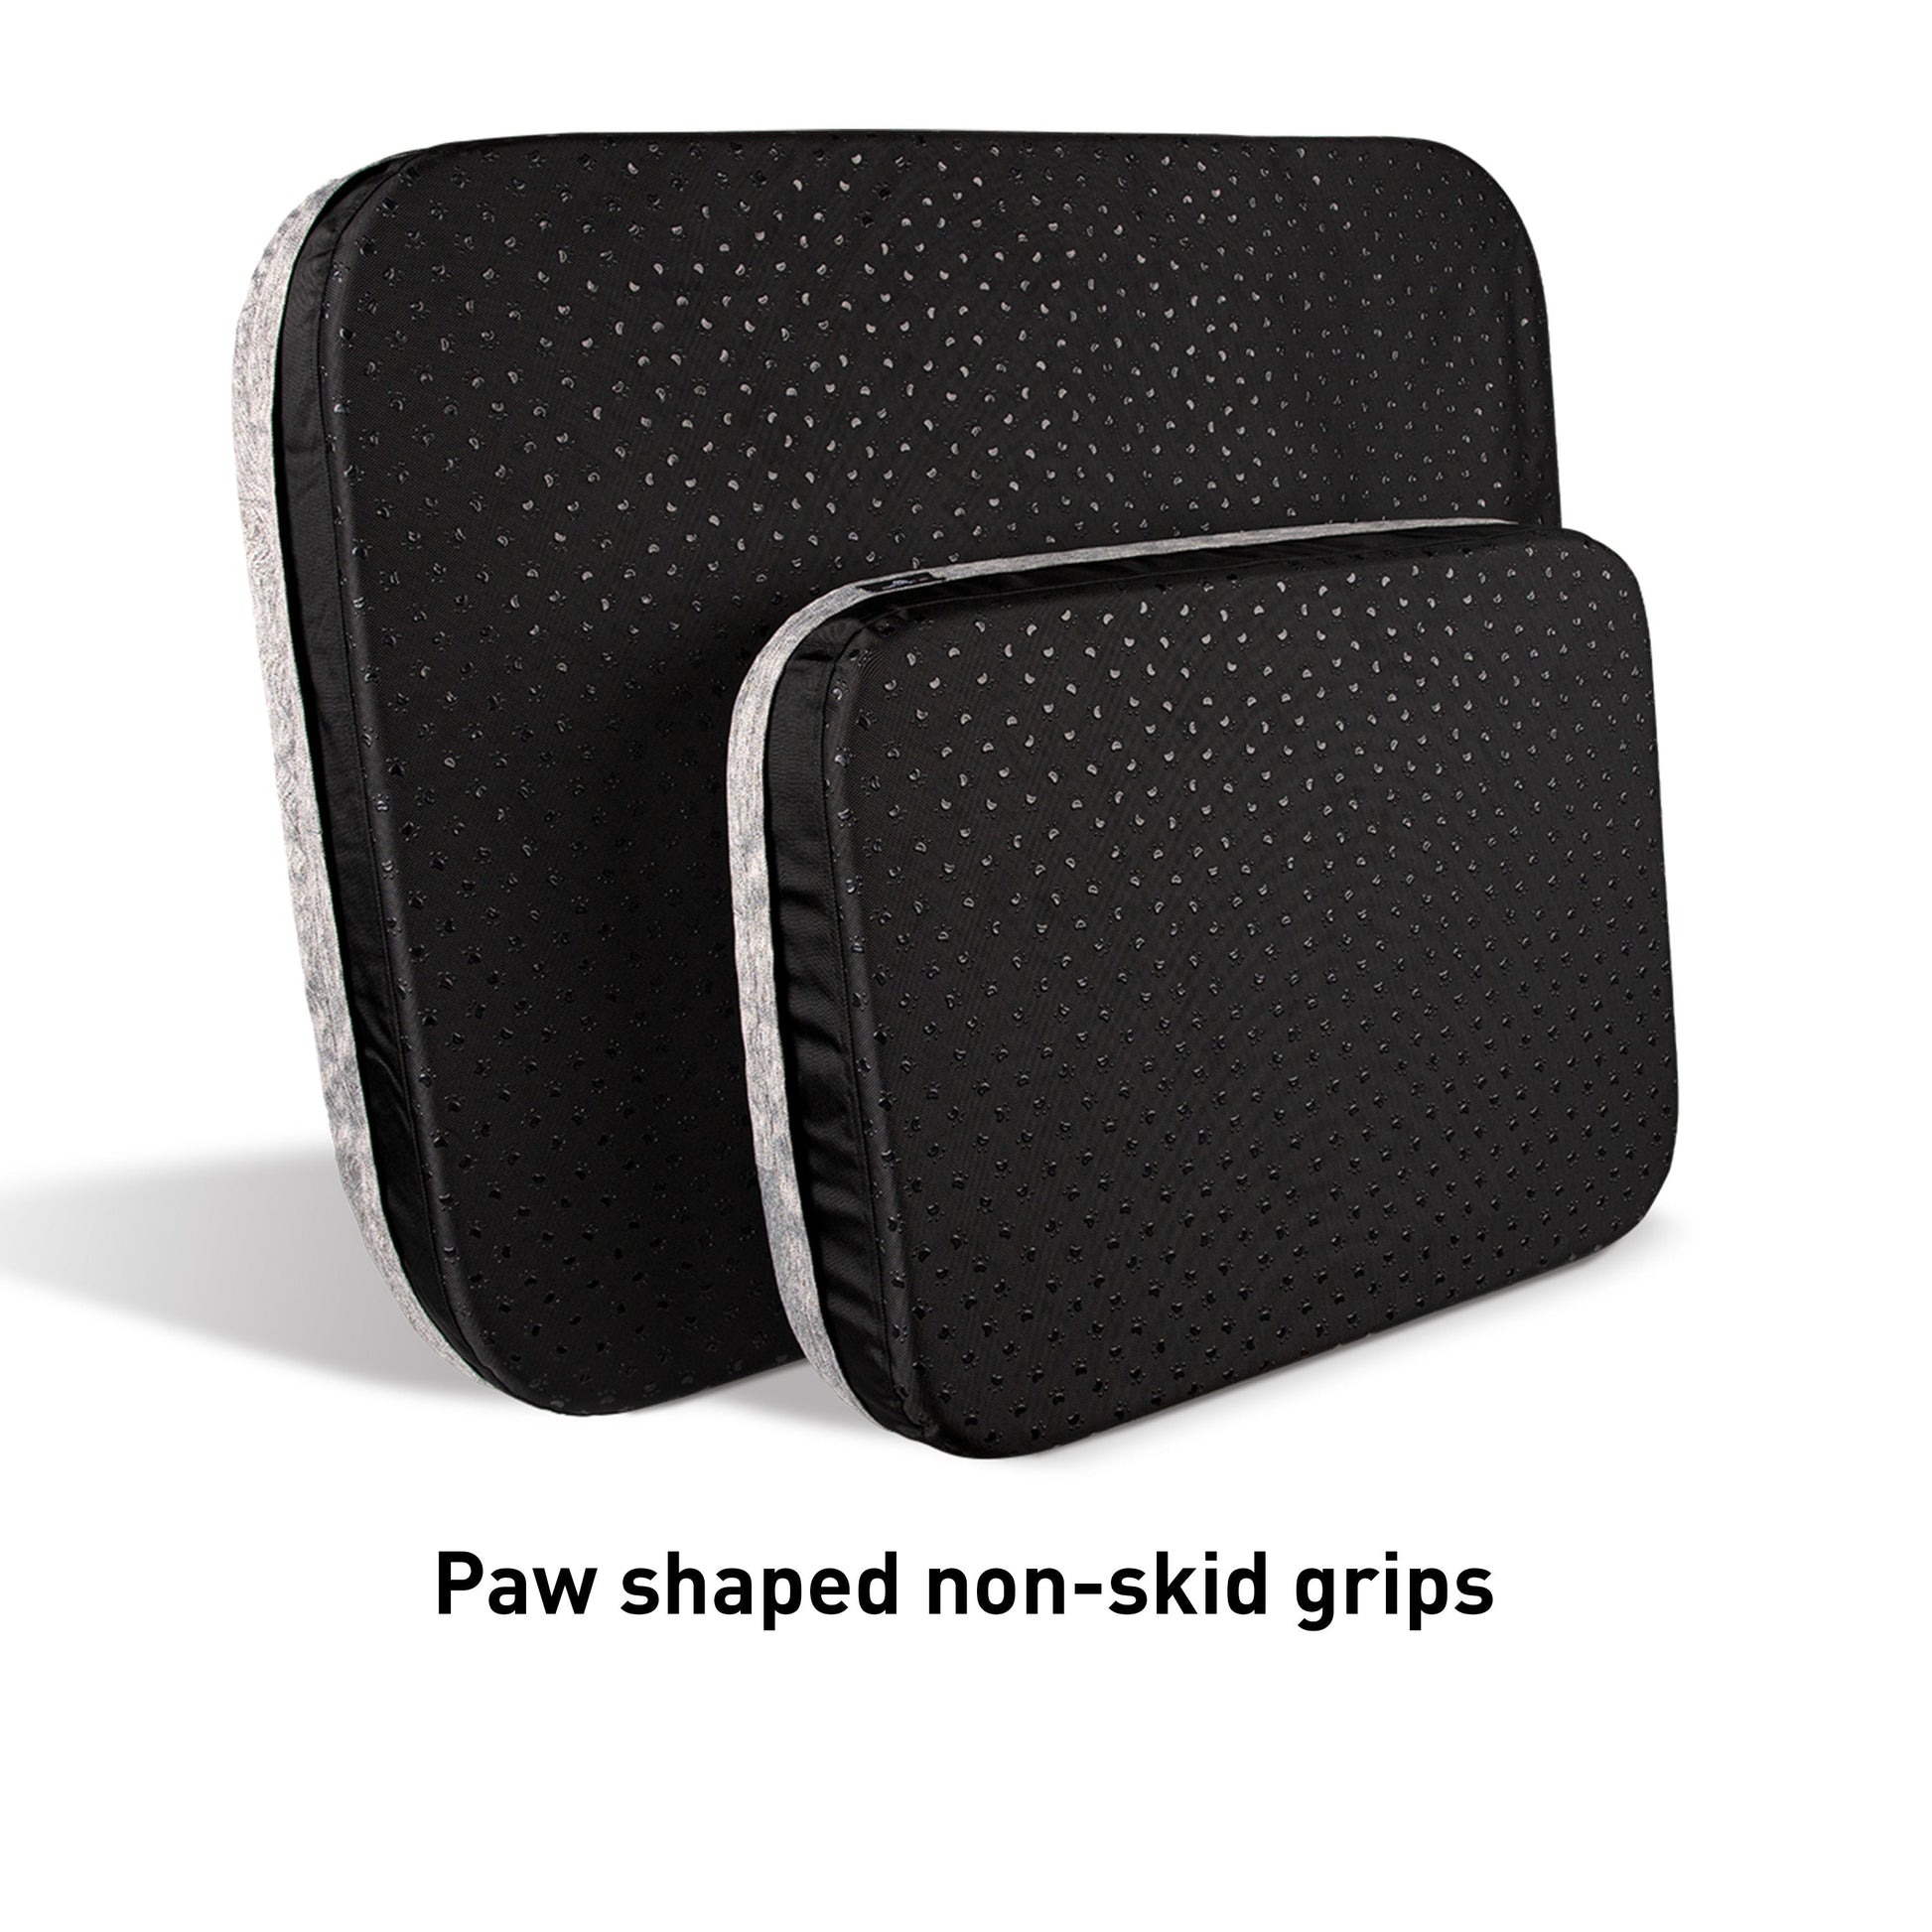 Bedgear Performance Dog Bed paw shaped non-skid grips on underside